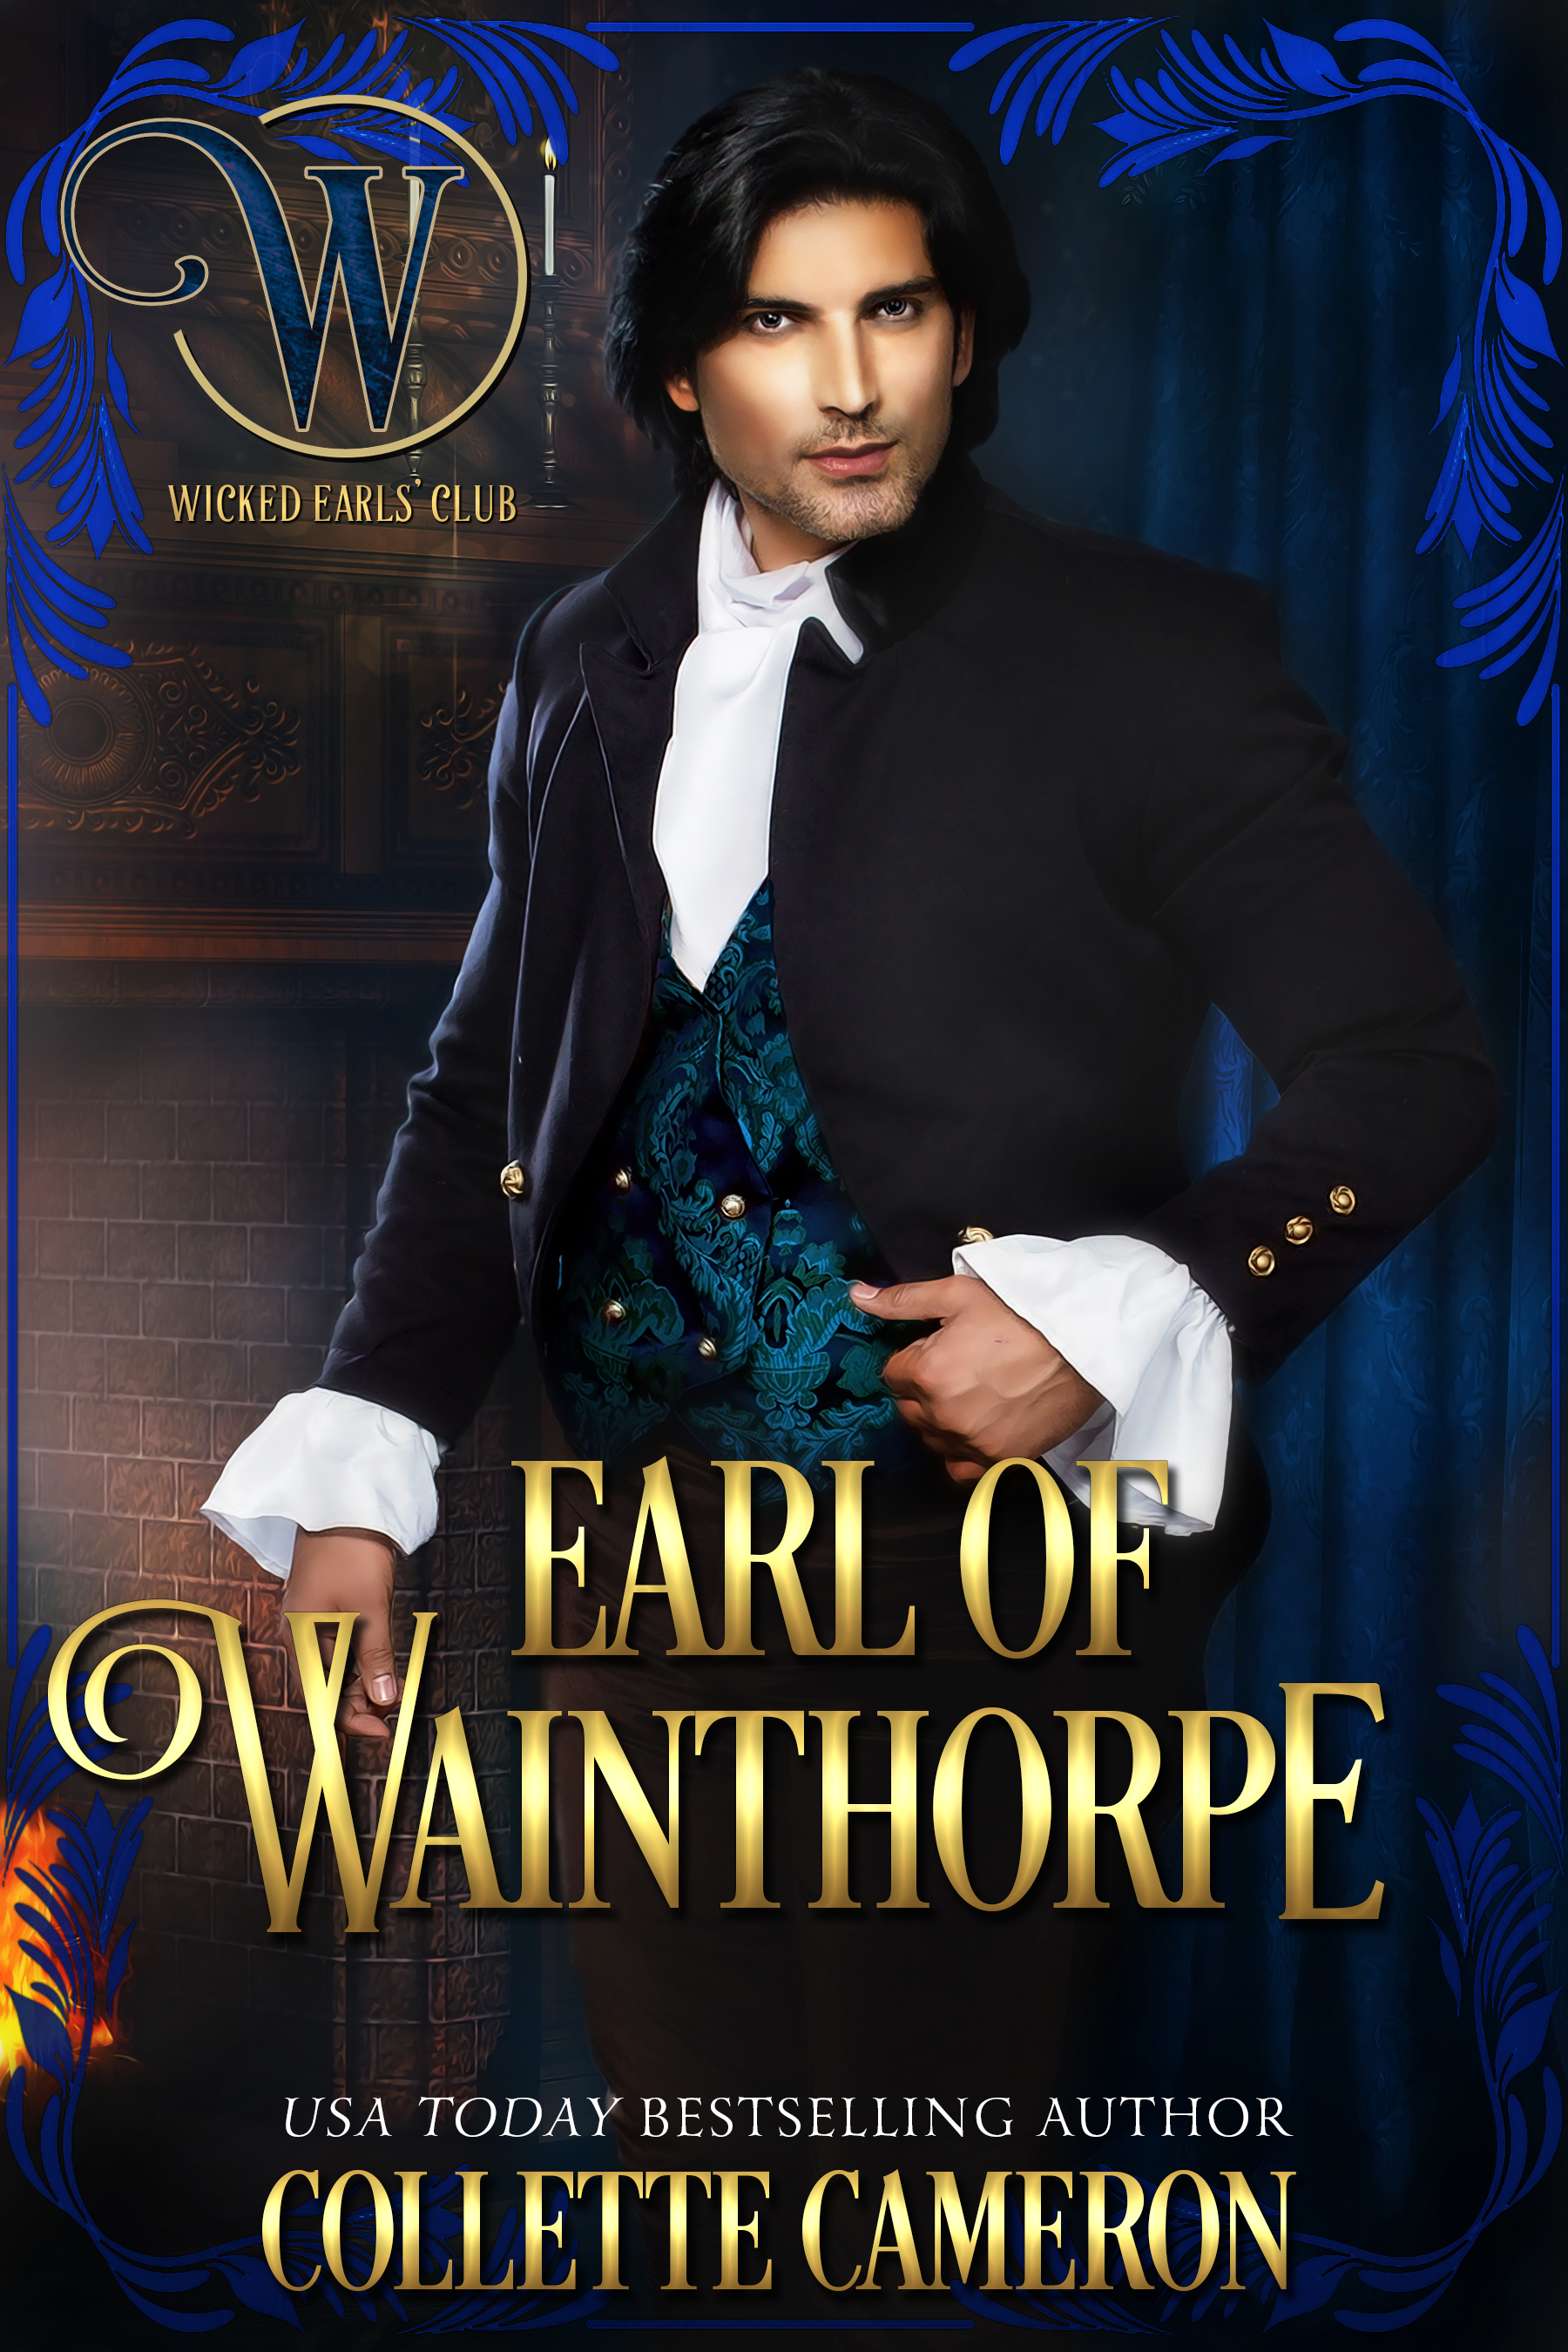 Earl of Wainthorpe, Wicked Earls' Club, USA Today Bestselling Author Collette Cameron, Collette Cameron historical romances, Collette Cameron Regency romances, Collette Cameron romance novels, Collette Cameron Scottish historical romance books, Blue Rose Romance, Bestselling historical romance authors, historical romance novels, Regency romance novels, Highlander romance books, Scottish romance novels, romance novel covers, Bestselling romance novels, Bestselling Regency romances, Bestselling Scottish Romances, Bestselling Highlander romances, Victorian Romances, lords and ladies romance novels, Regency England Dukes romance books, aristocrats and royalty, happily ever after novels, love stories, wallflowers, rakes and rogues, award-winning books, Award-winning author, historical romance audio books, collettecameron.com, The Regency Rose Newsletter, Sweet-to-Spicy Timeless Romance, historical romance meme, romance meme, historical regency romance 